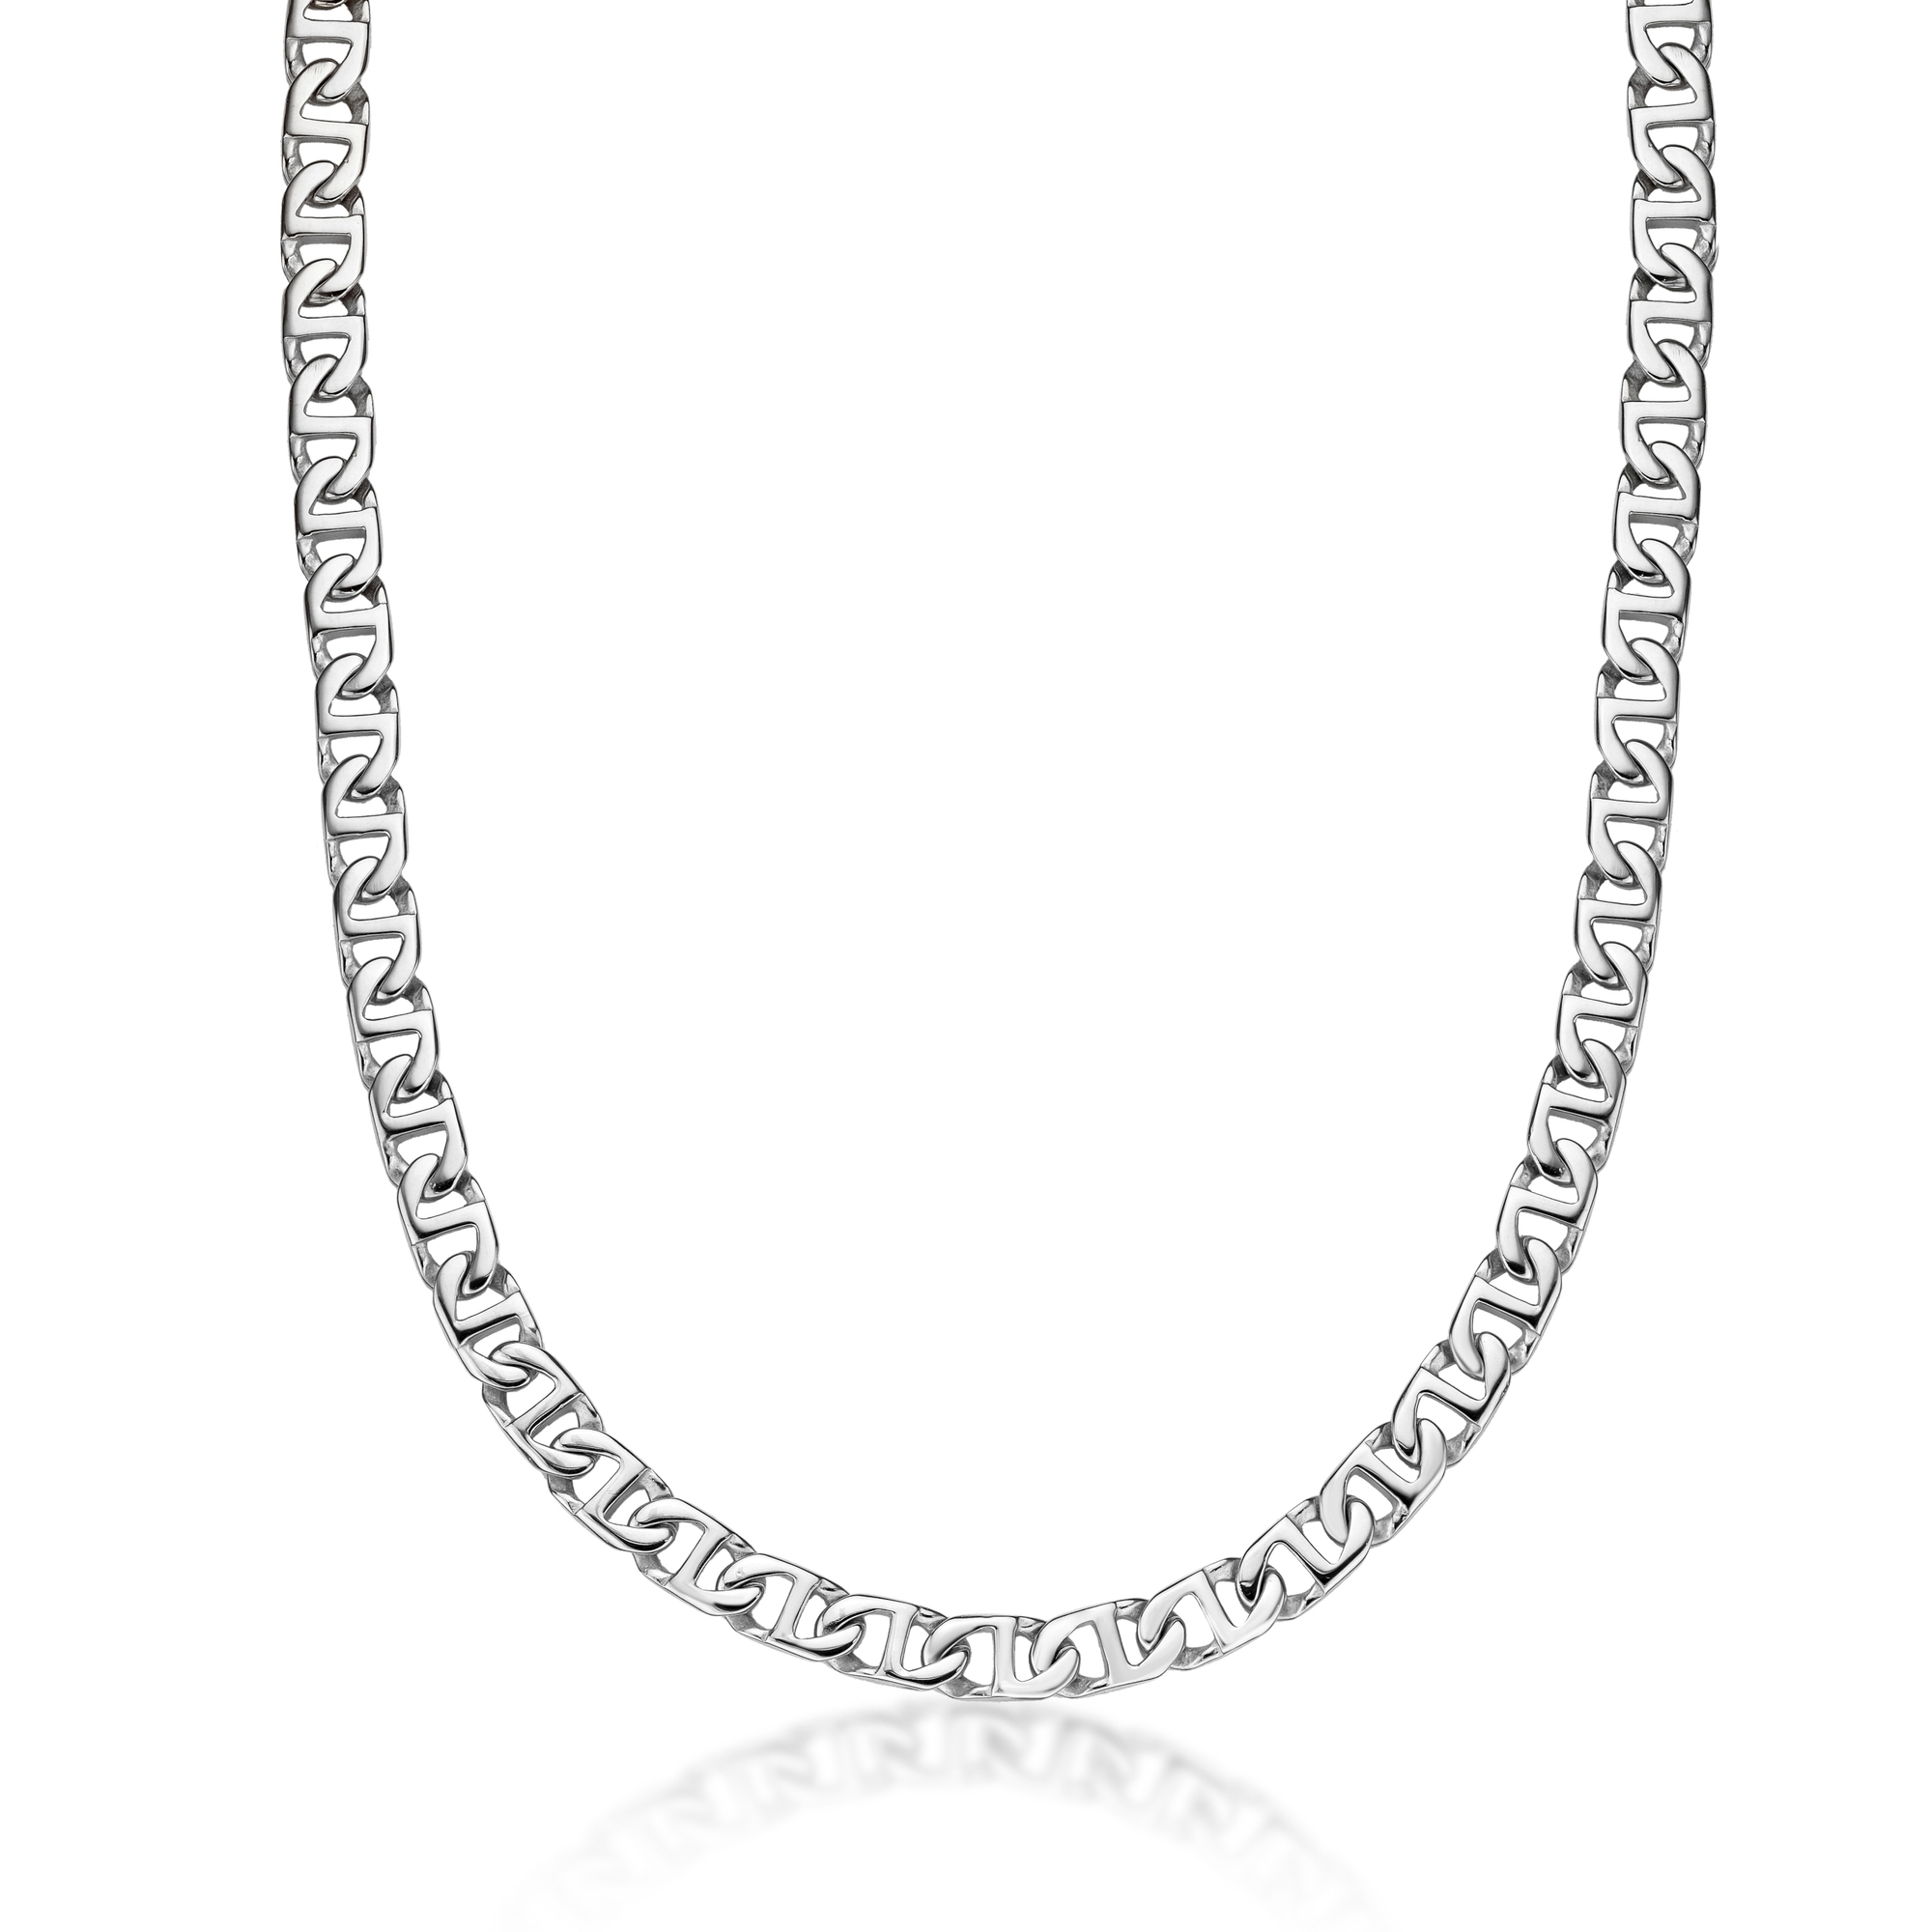 Men's Stainless Steel 10MM Mariner Chain Necklace - 22 Inch | Metro Jewelry